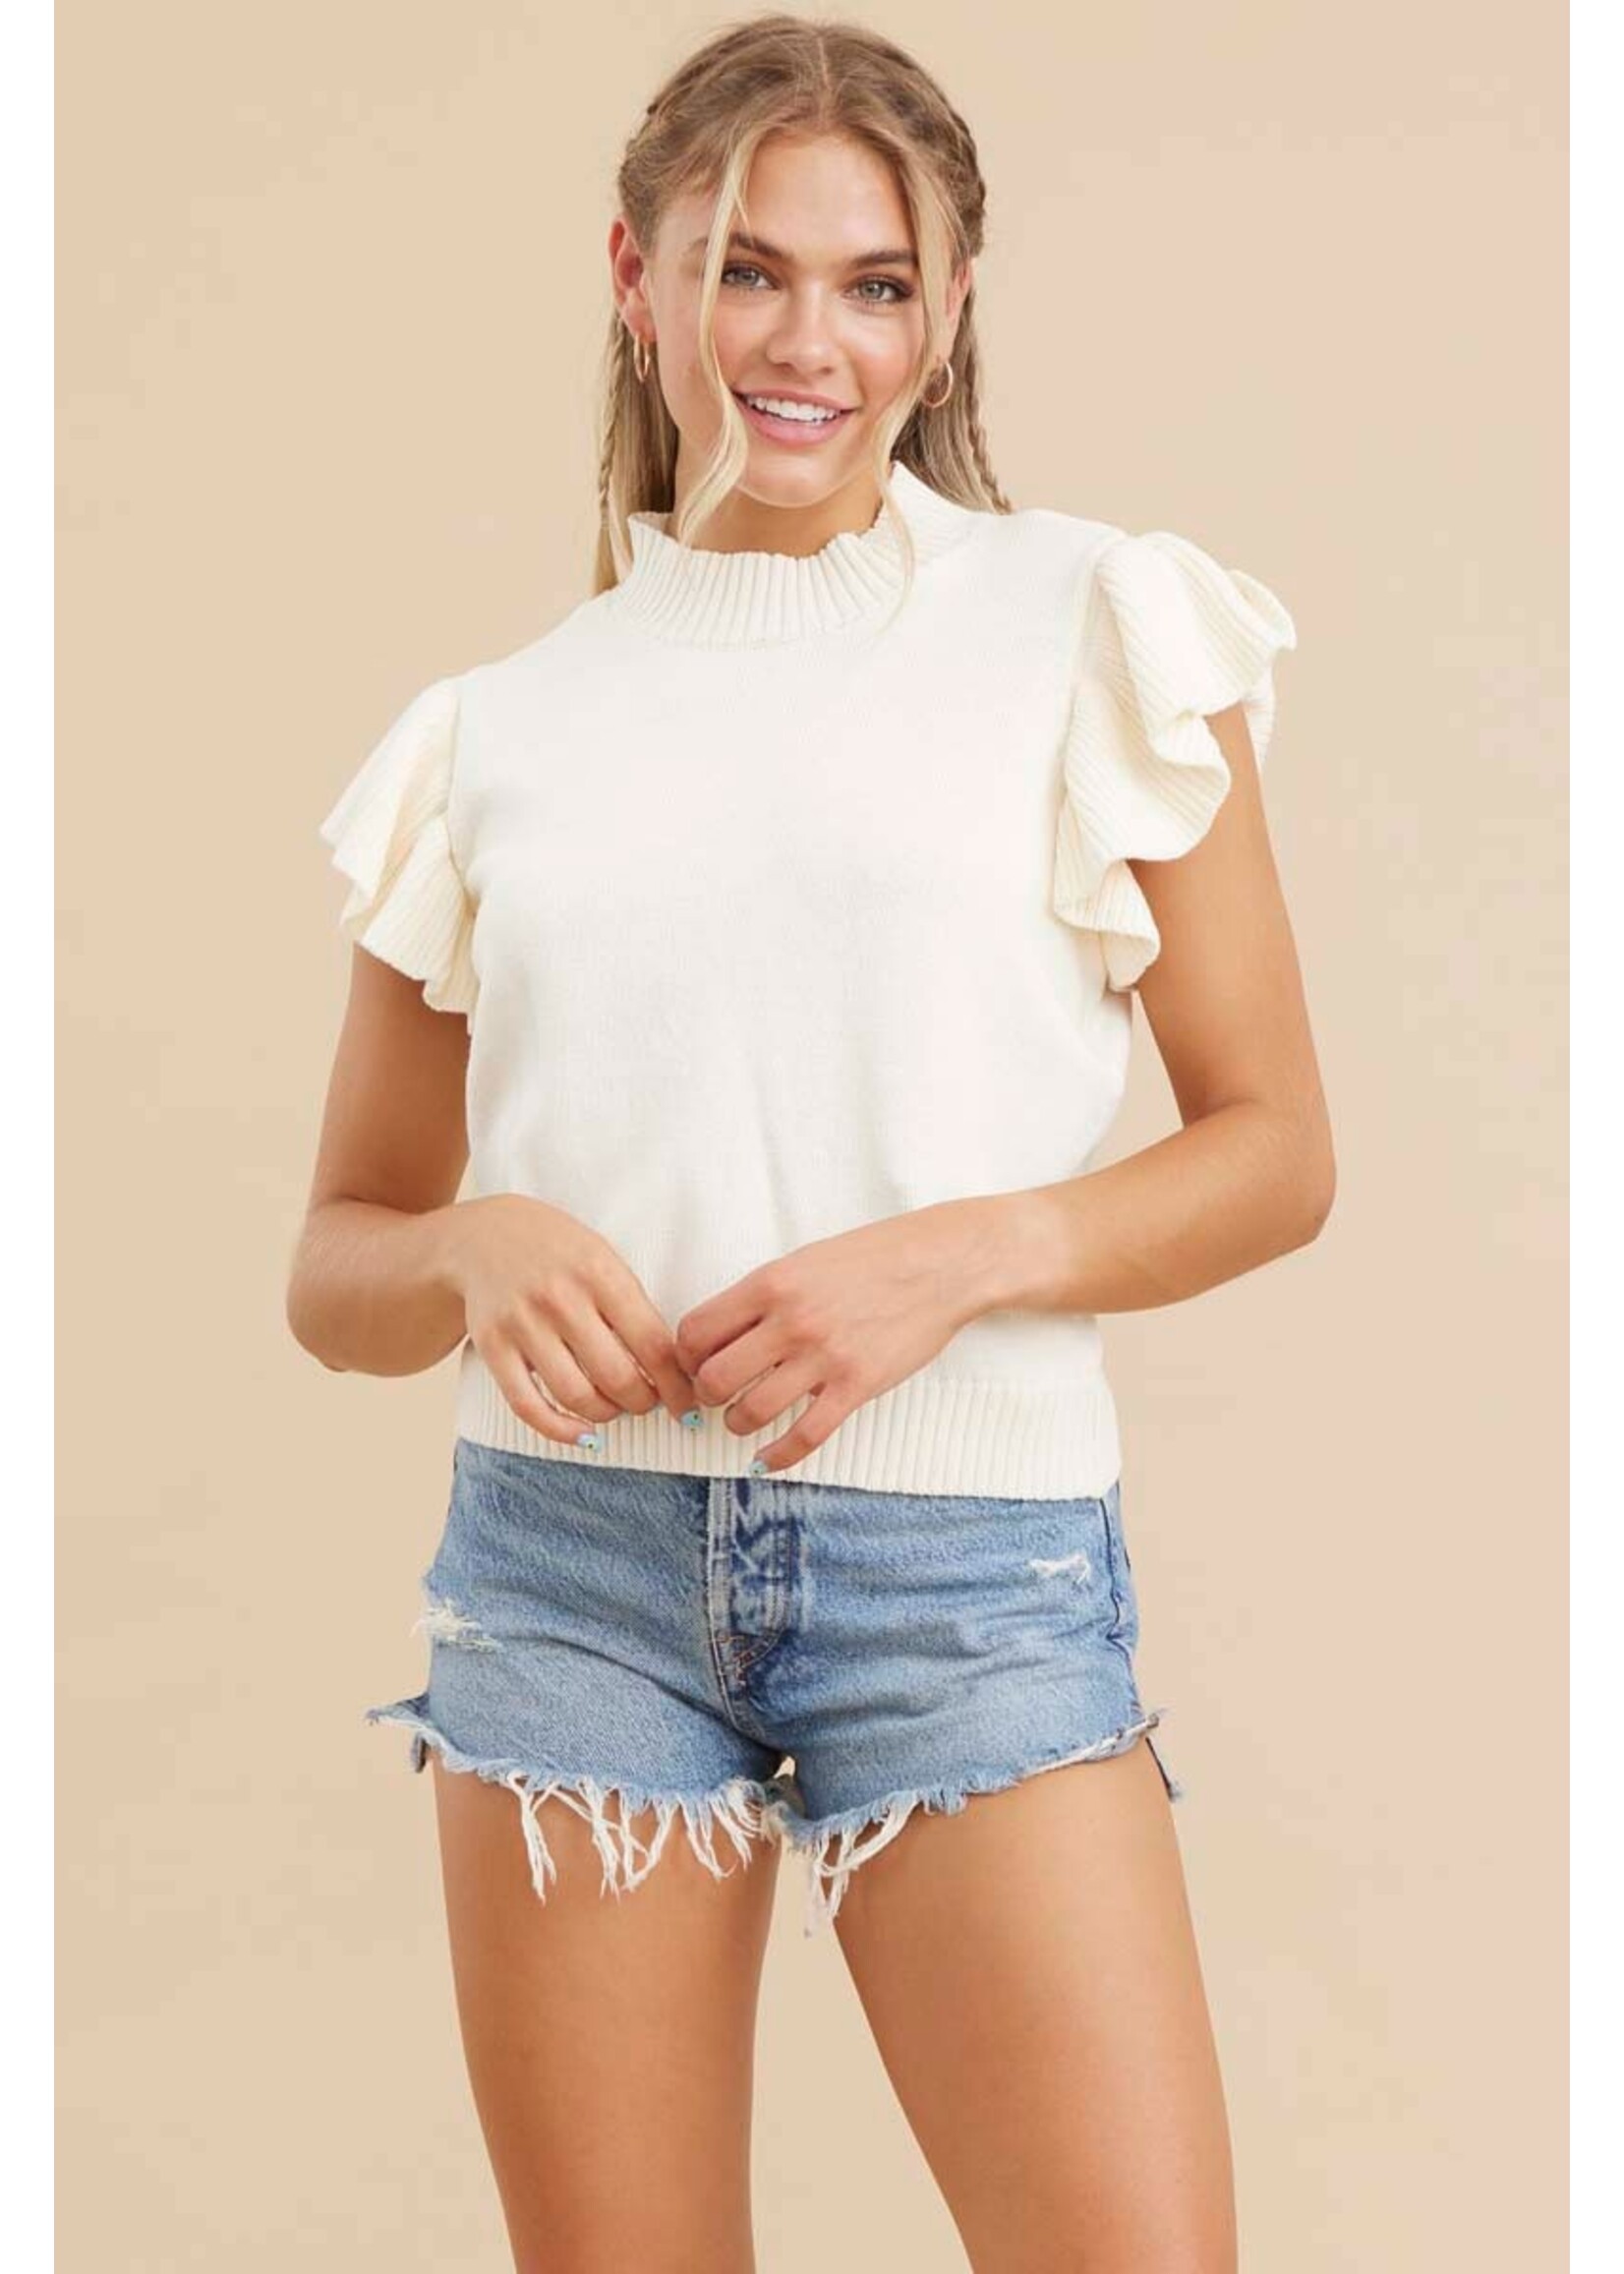 Jodifl Solid Knit Top with Ruffle